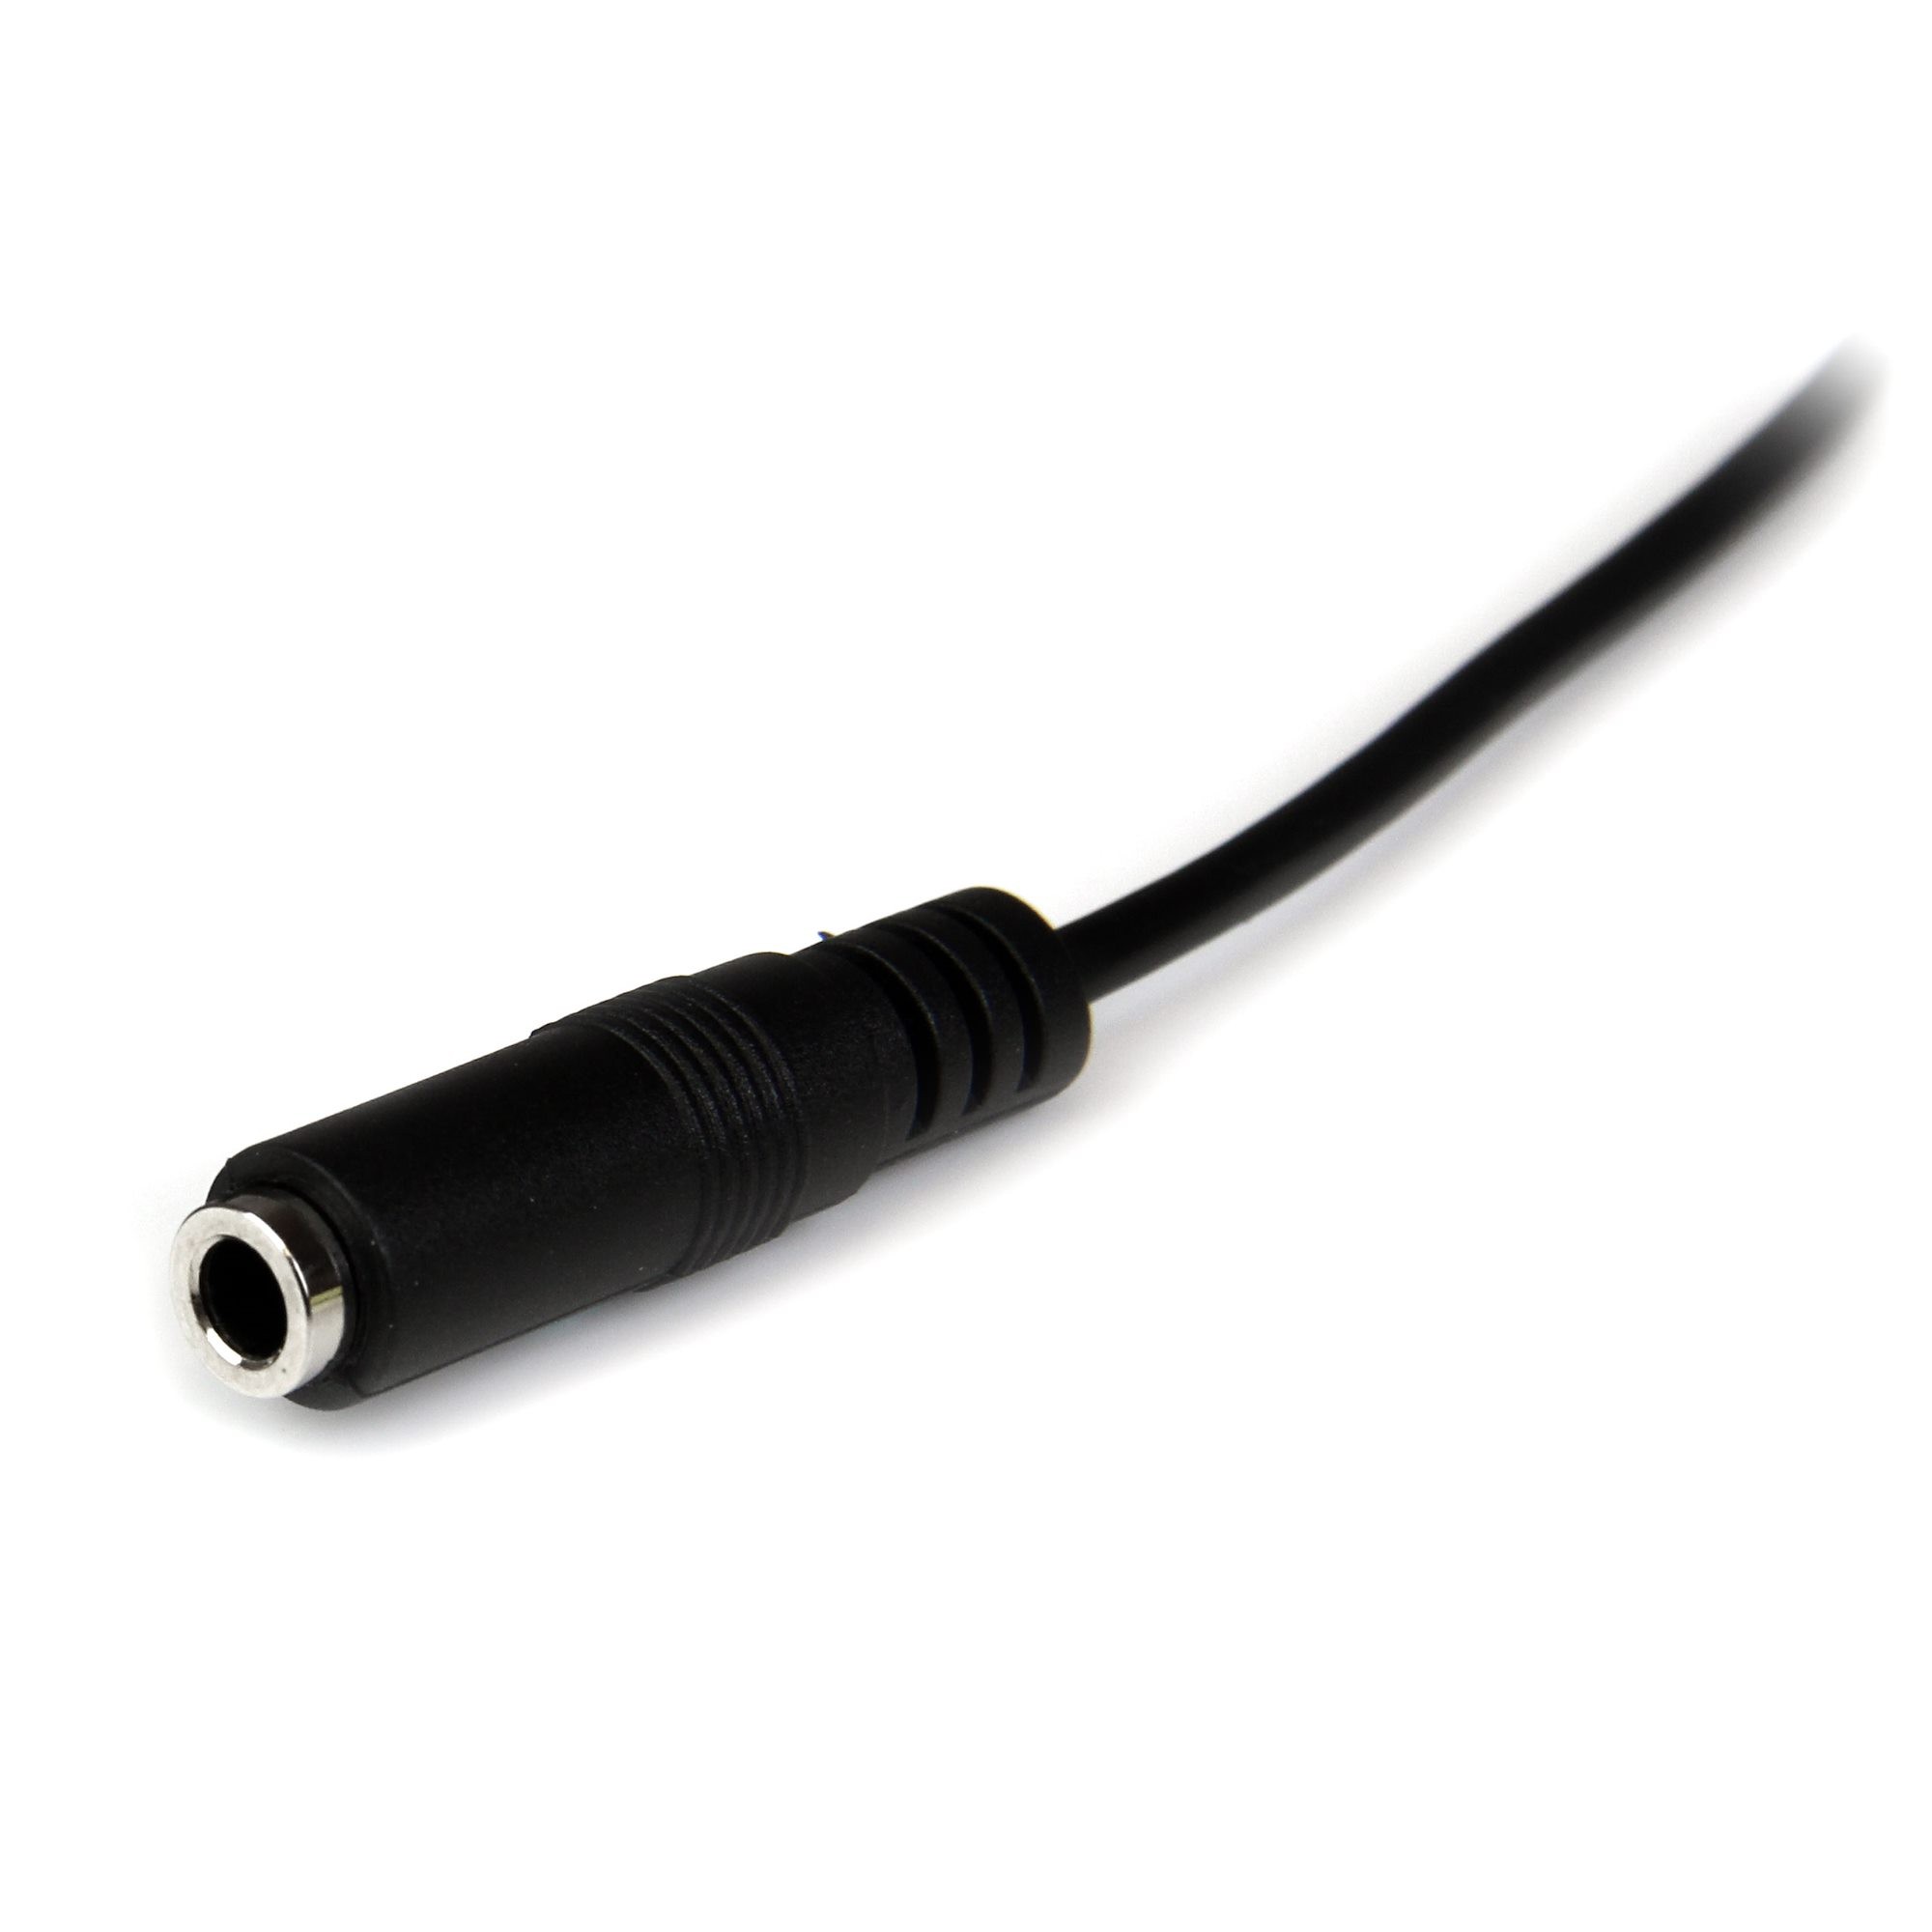 15 ft Slim 3.5mm Stereo Audio Cable - M/M